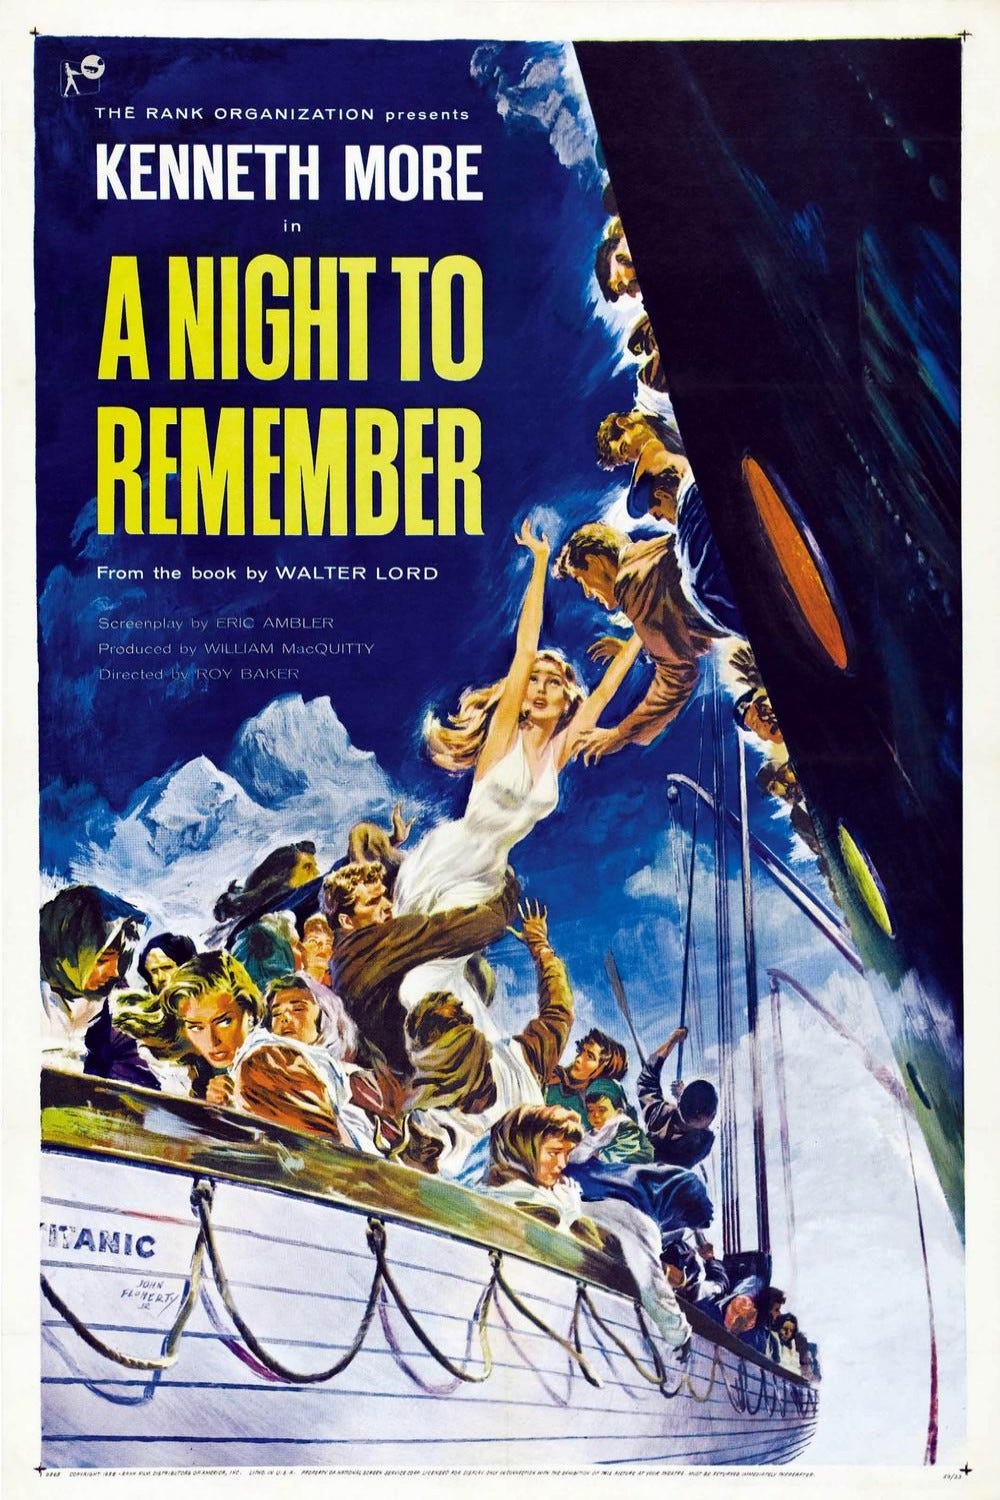 A night to remember (1958) film poster.